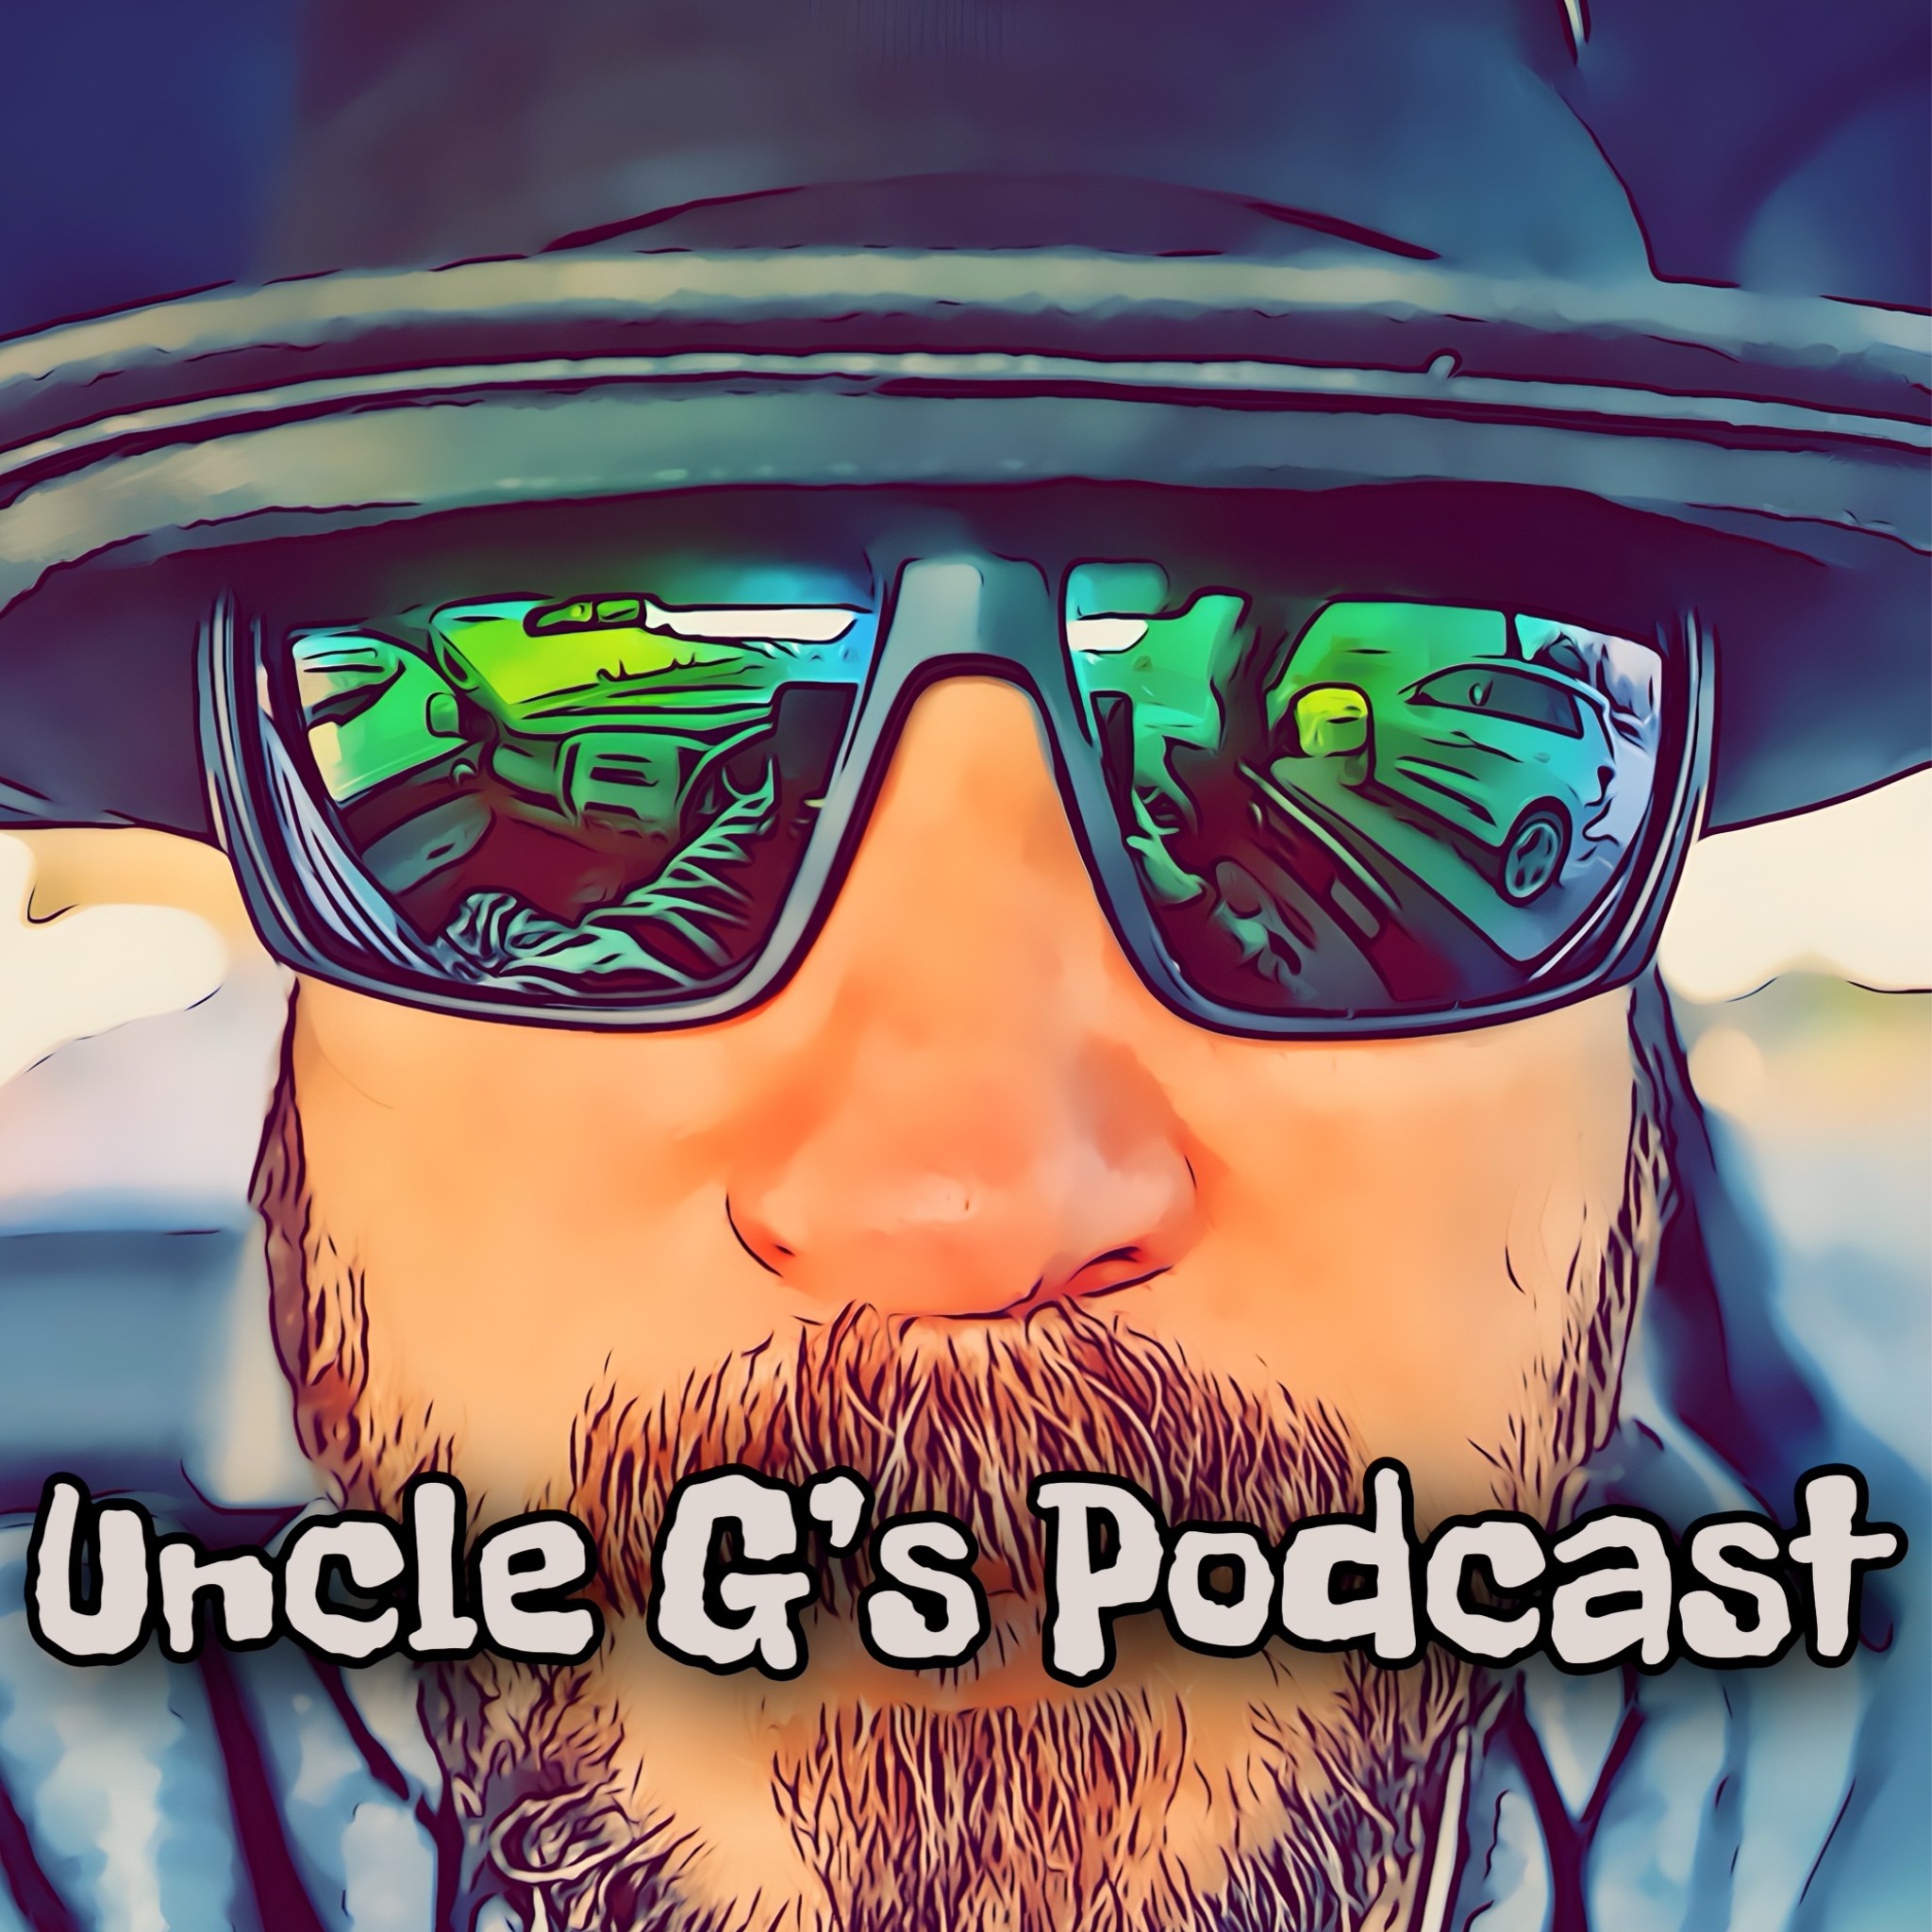 Uncle G’s Podcast